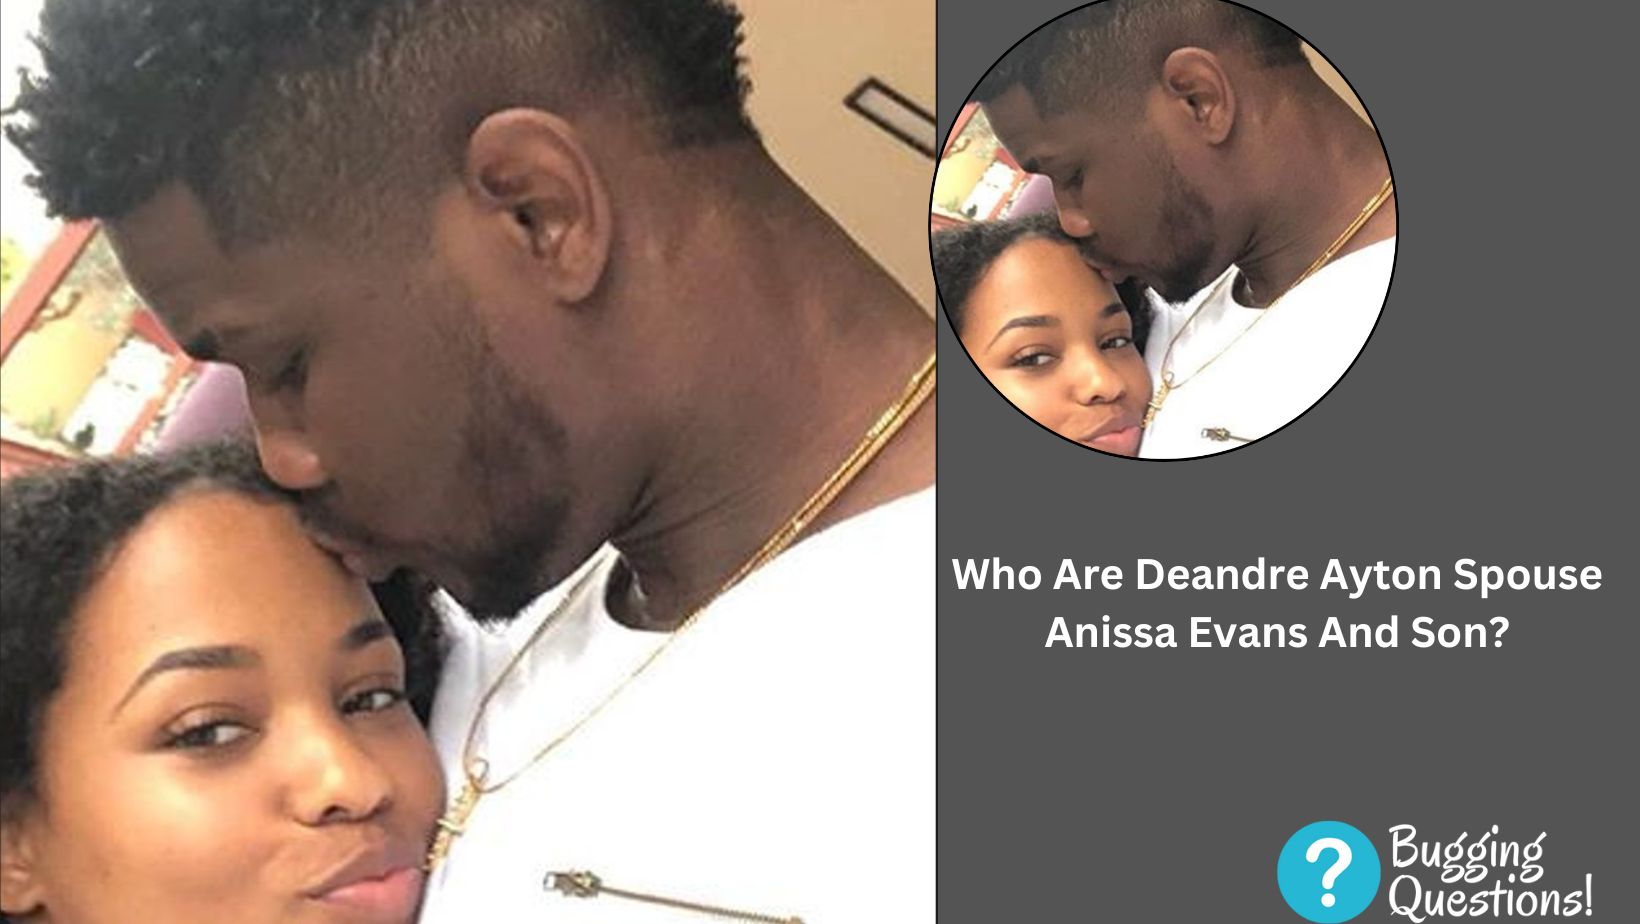 Who Are Deandre Ayton Spouse Anissa Evans And Son?